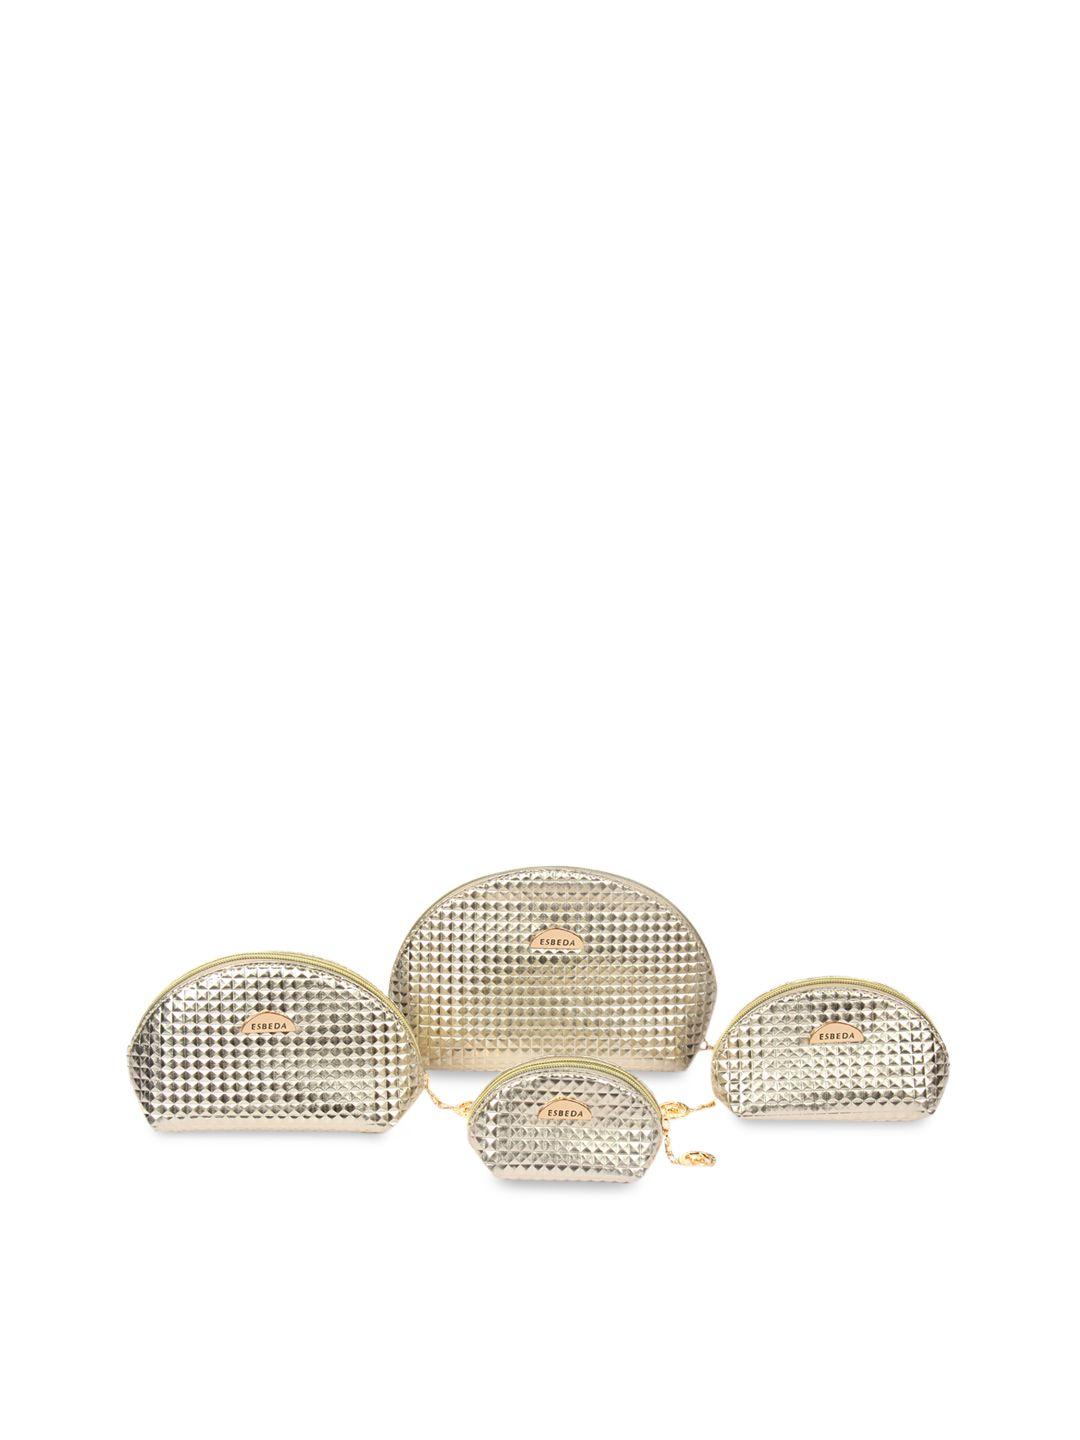 esbeda set of 4 gold-toned textured clutches